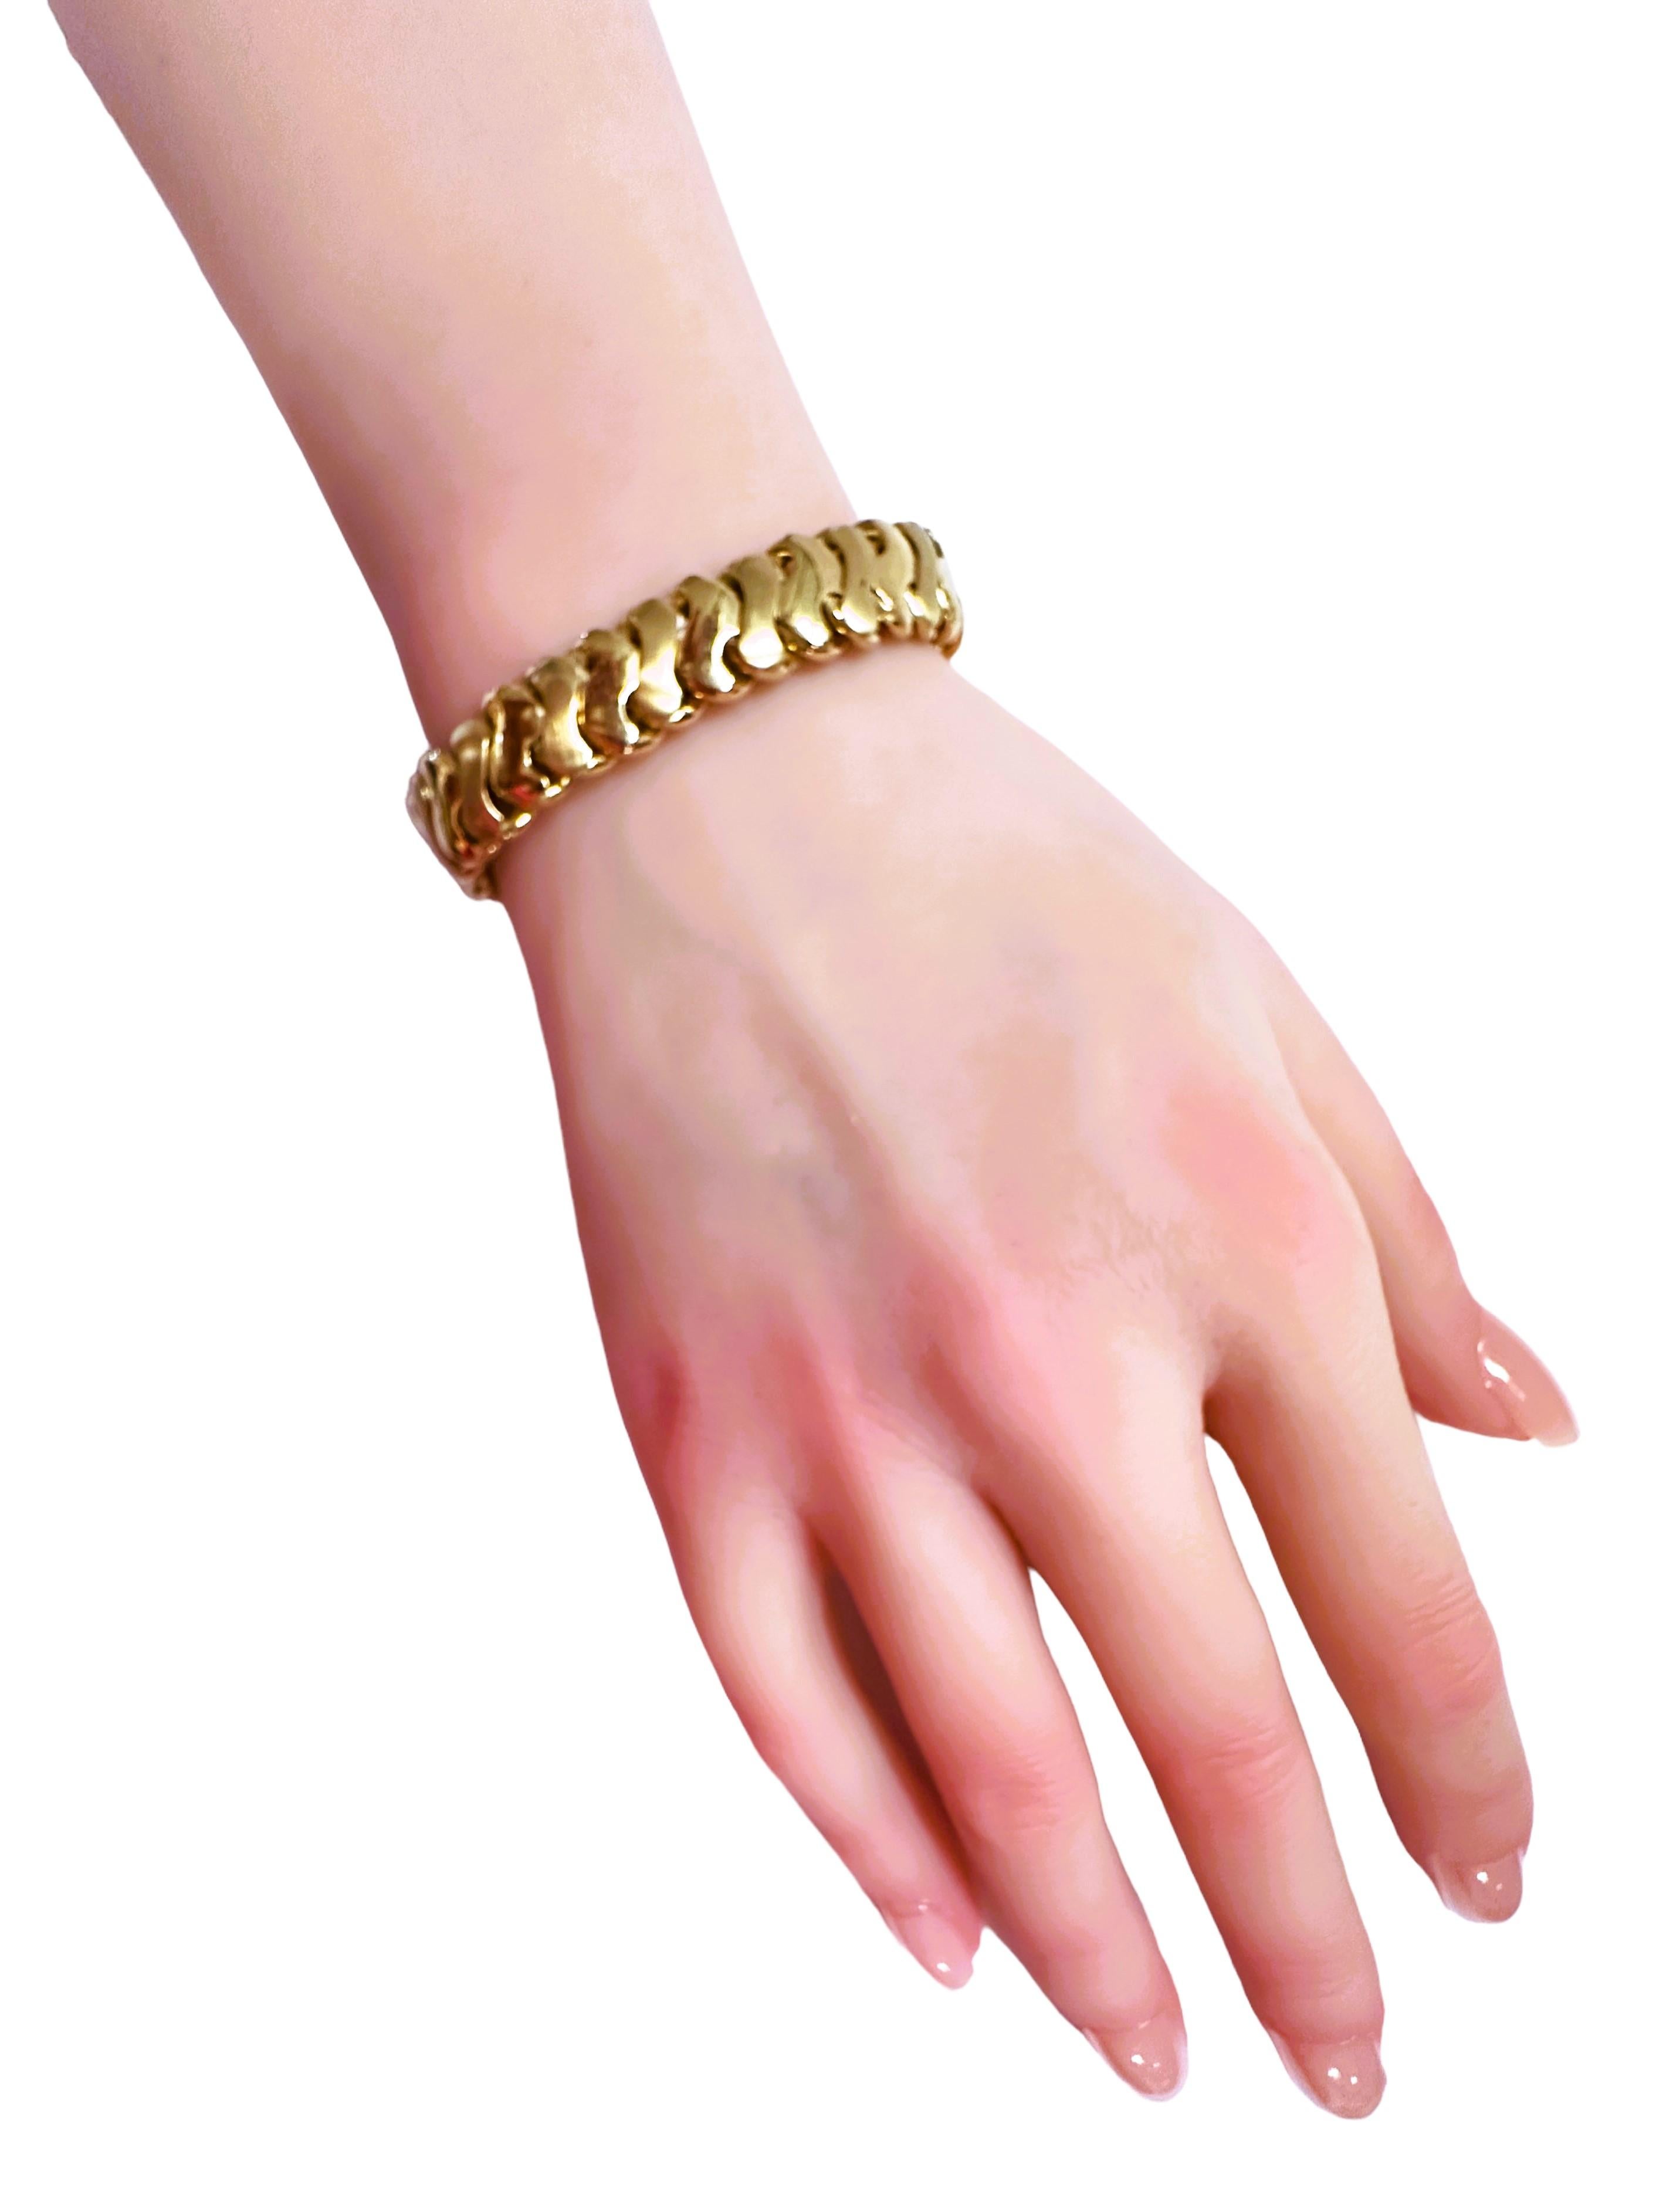 18k Yellow Gold High Polish Two-Sided Italian Bracelet 7.5 Inches 38.78 Grams 2